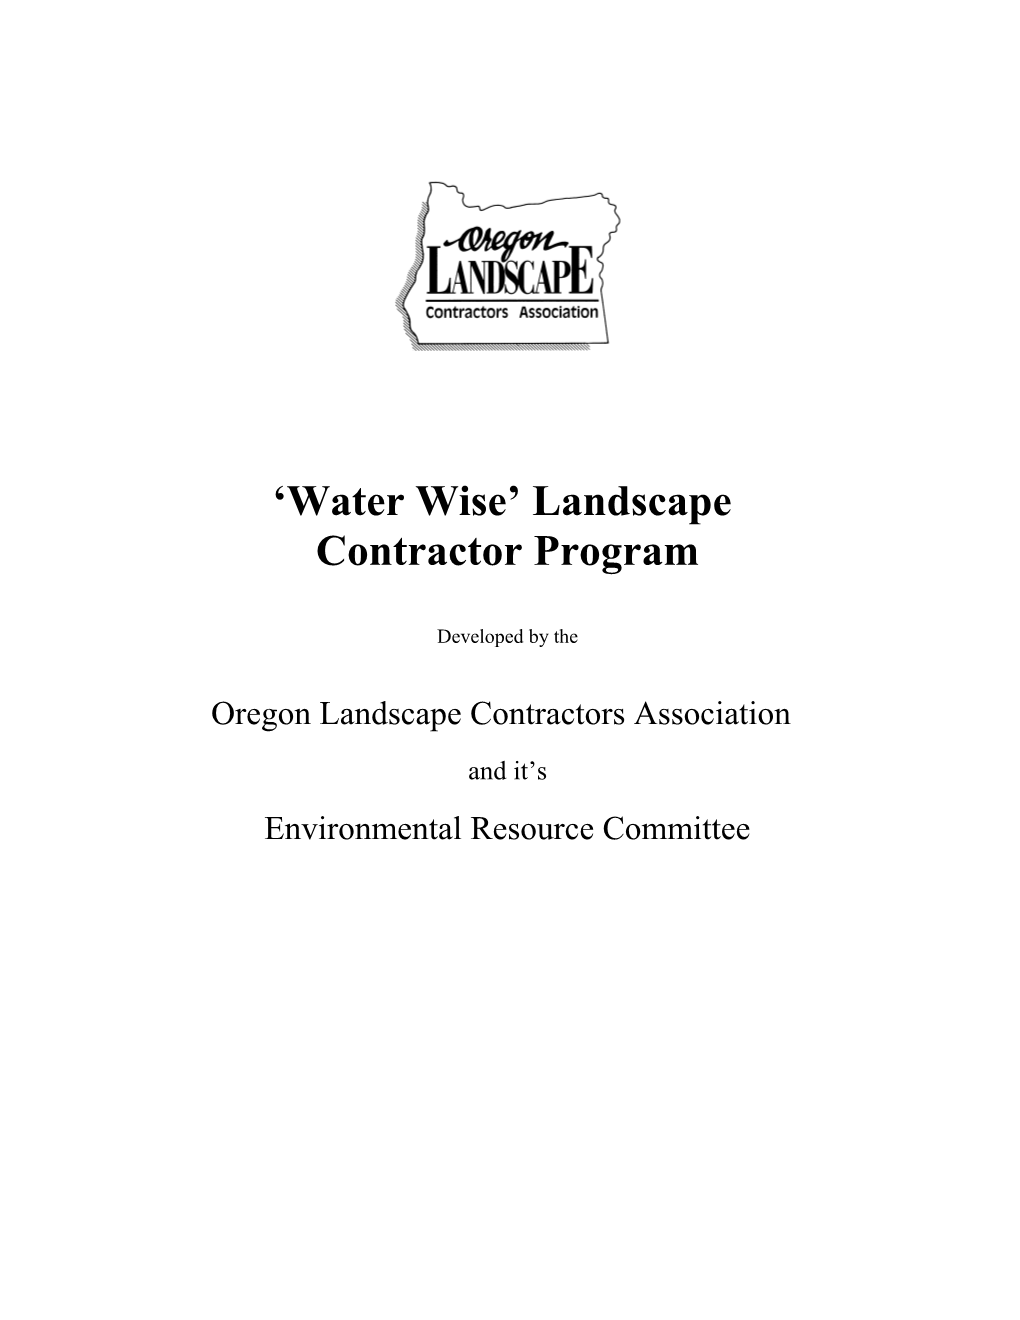 Water Wise Landscape Contractor